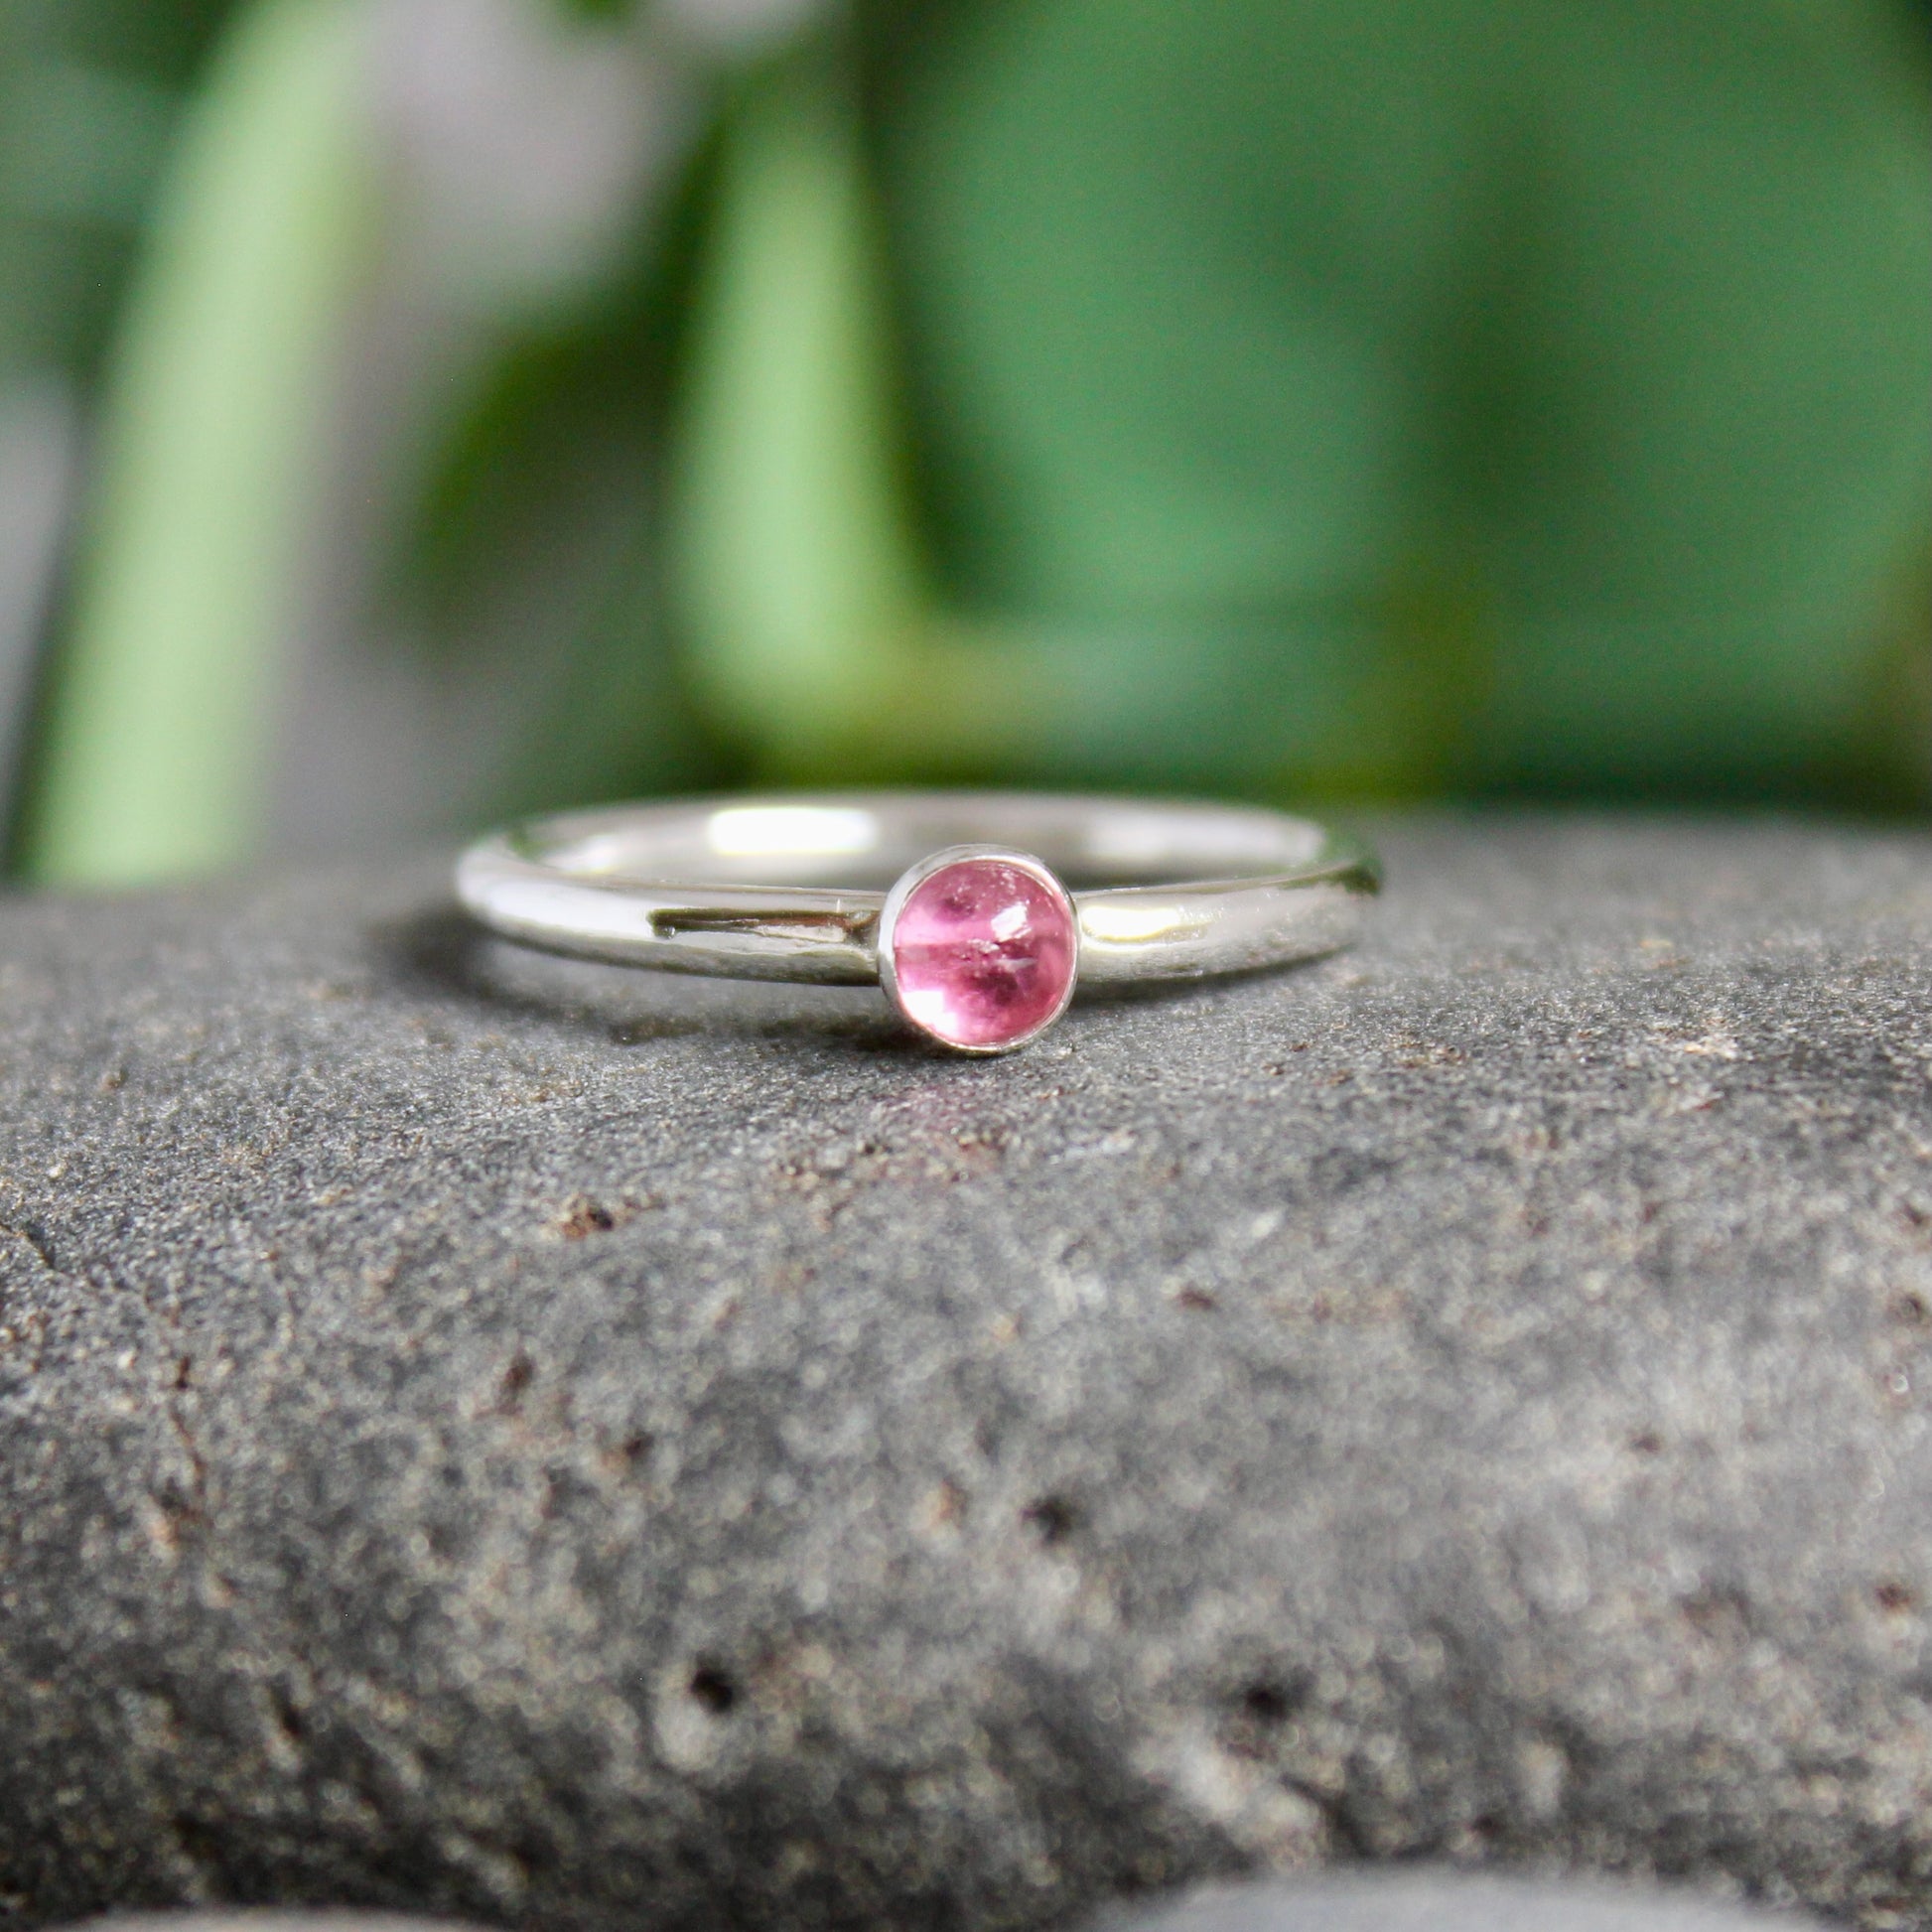 a 4mm round pink tourmaline set in a sterling silver bezel on a sturdy silver band. 